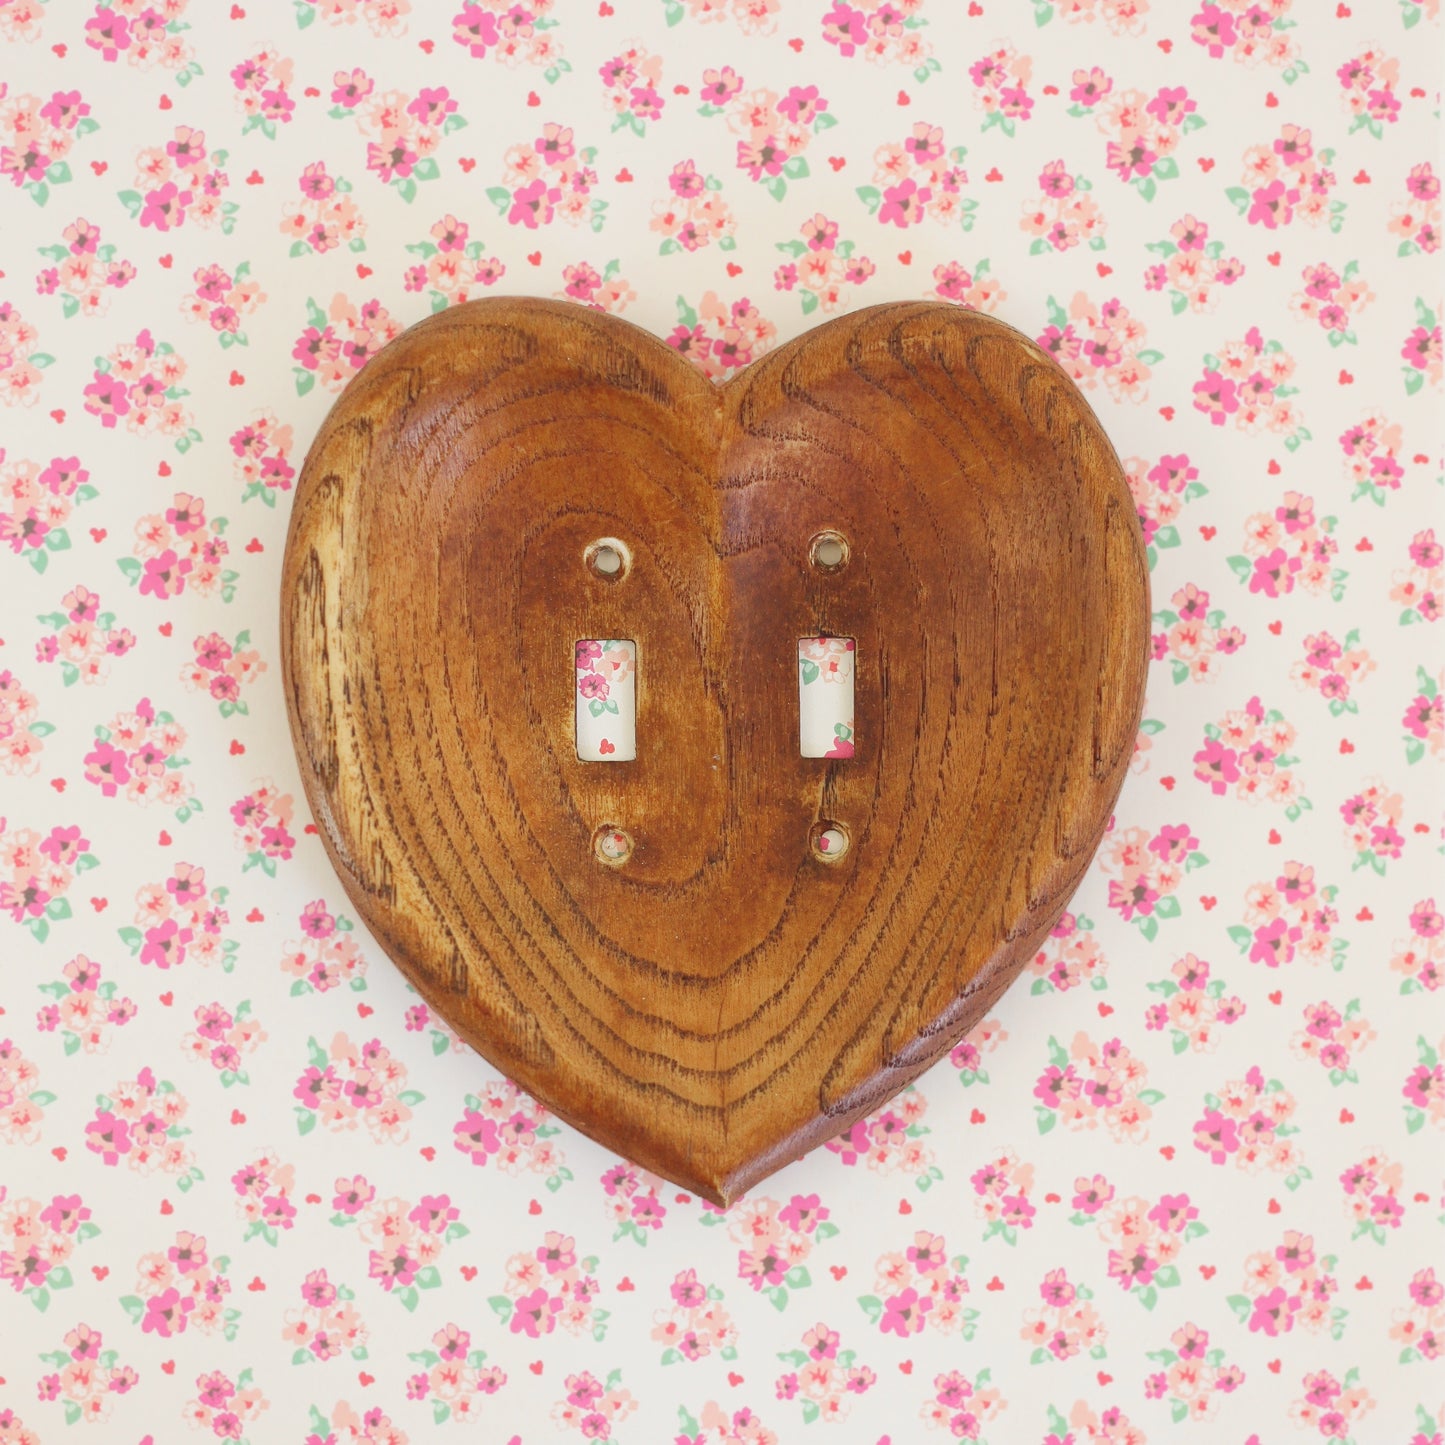 SOLD - Vintage Carved Wooden Heart Switch Plate Cover